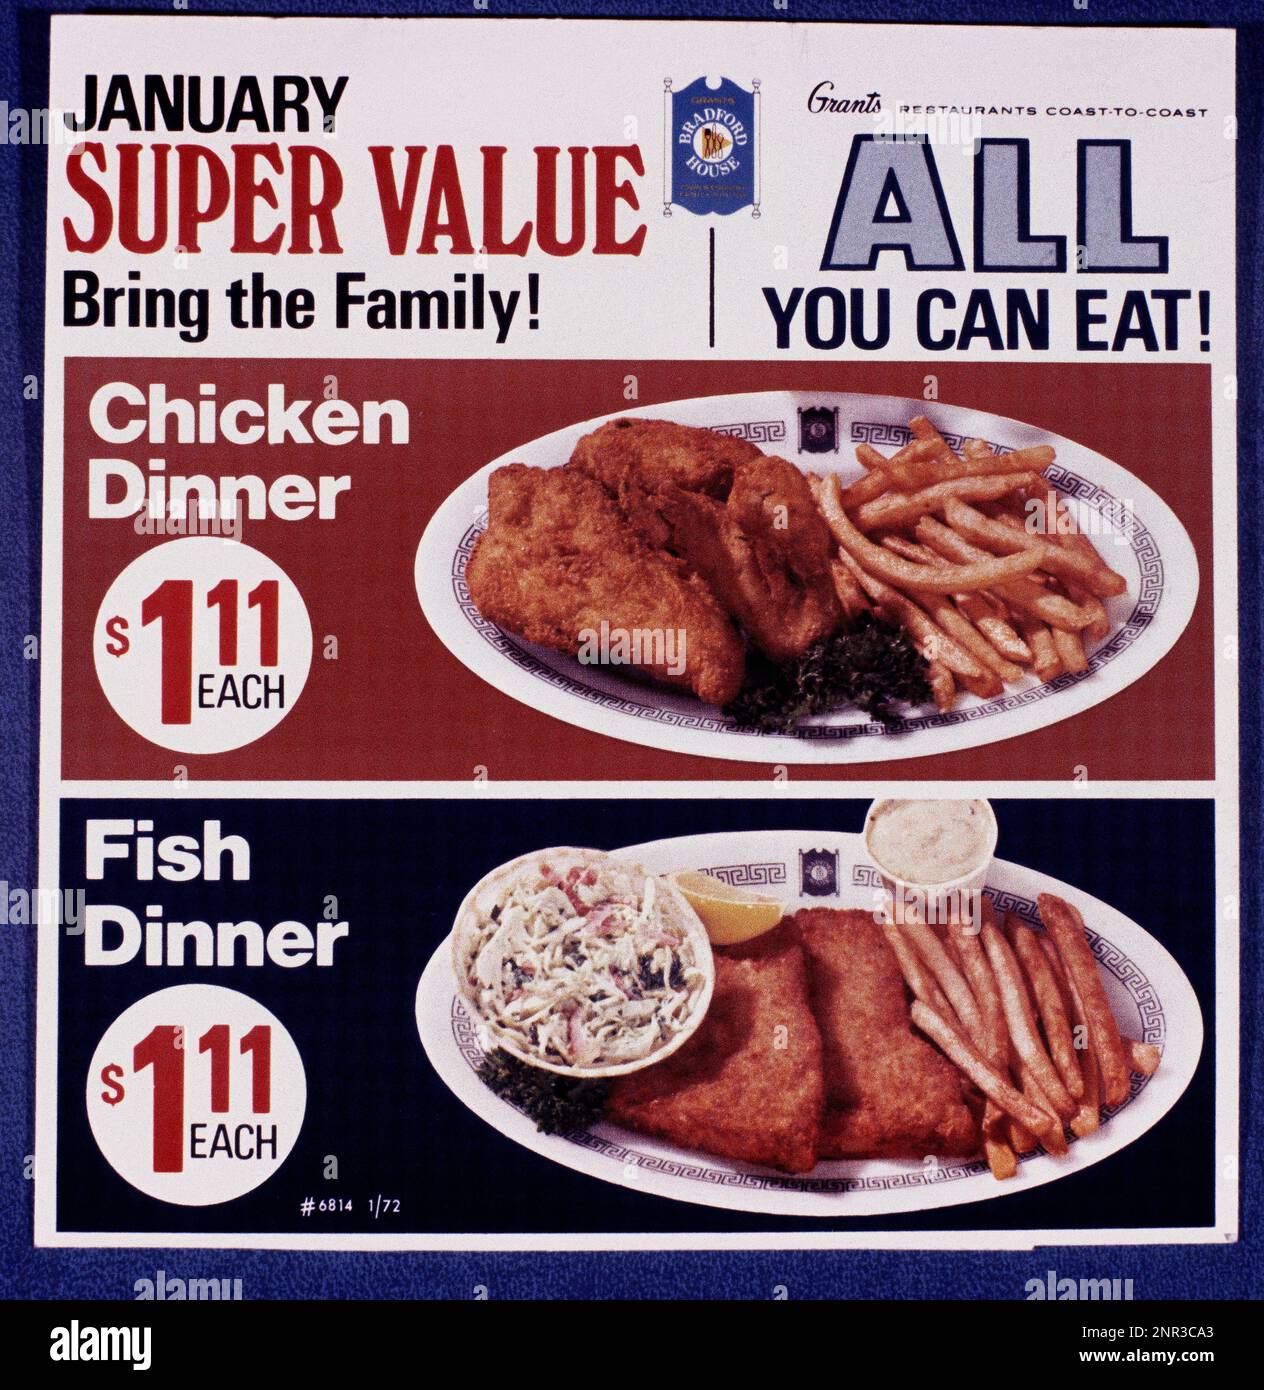 poster promoting all you can eat values in the Bradford House Restaurant in a WT Grants store in San Jose, California in 1972 Stock Photo